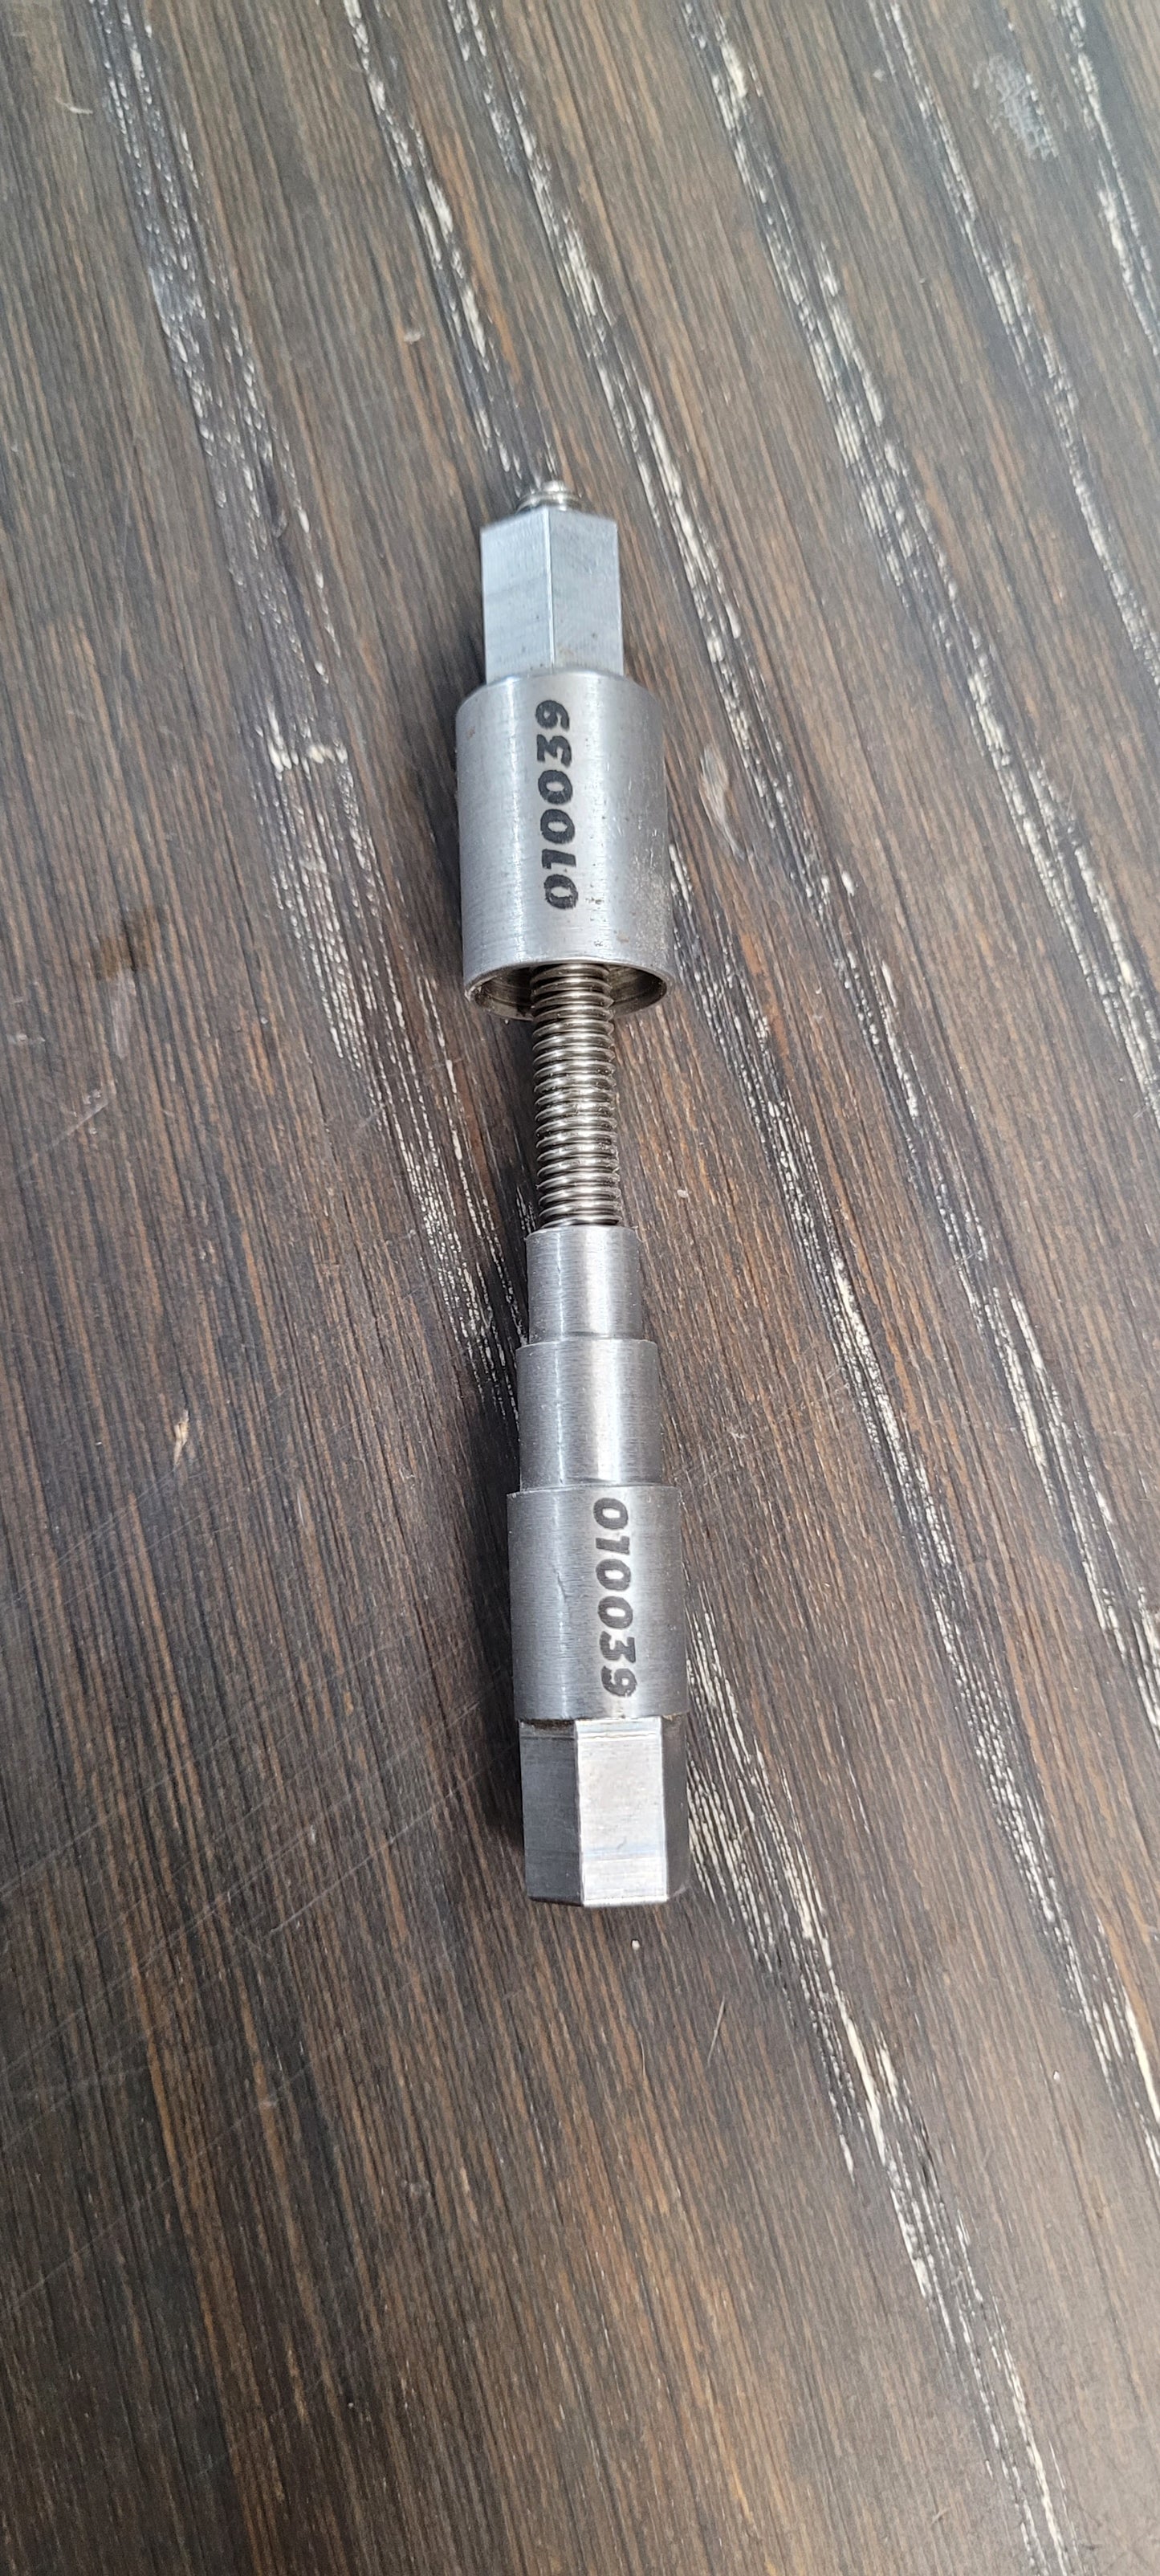 Shock Hardware Removal Tool